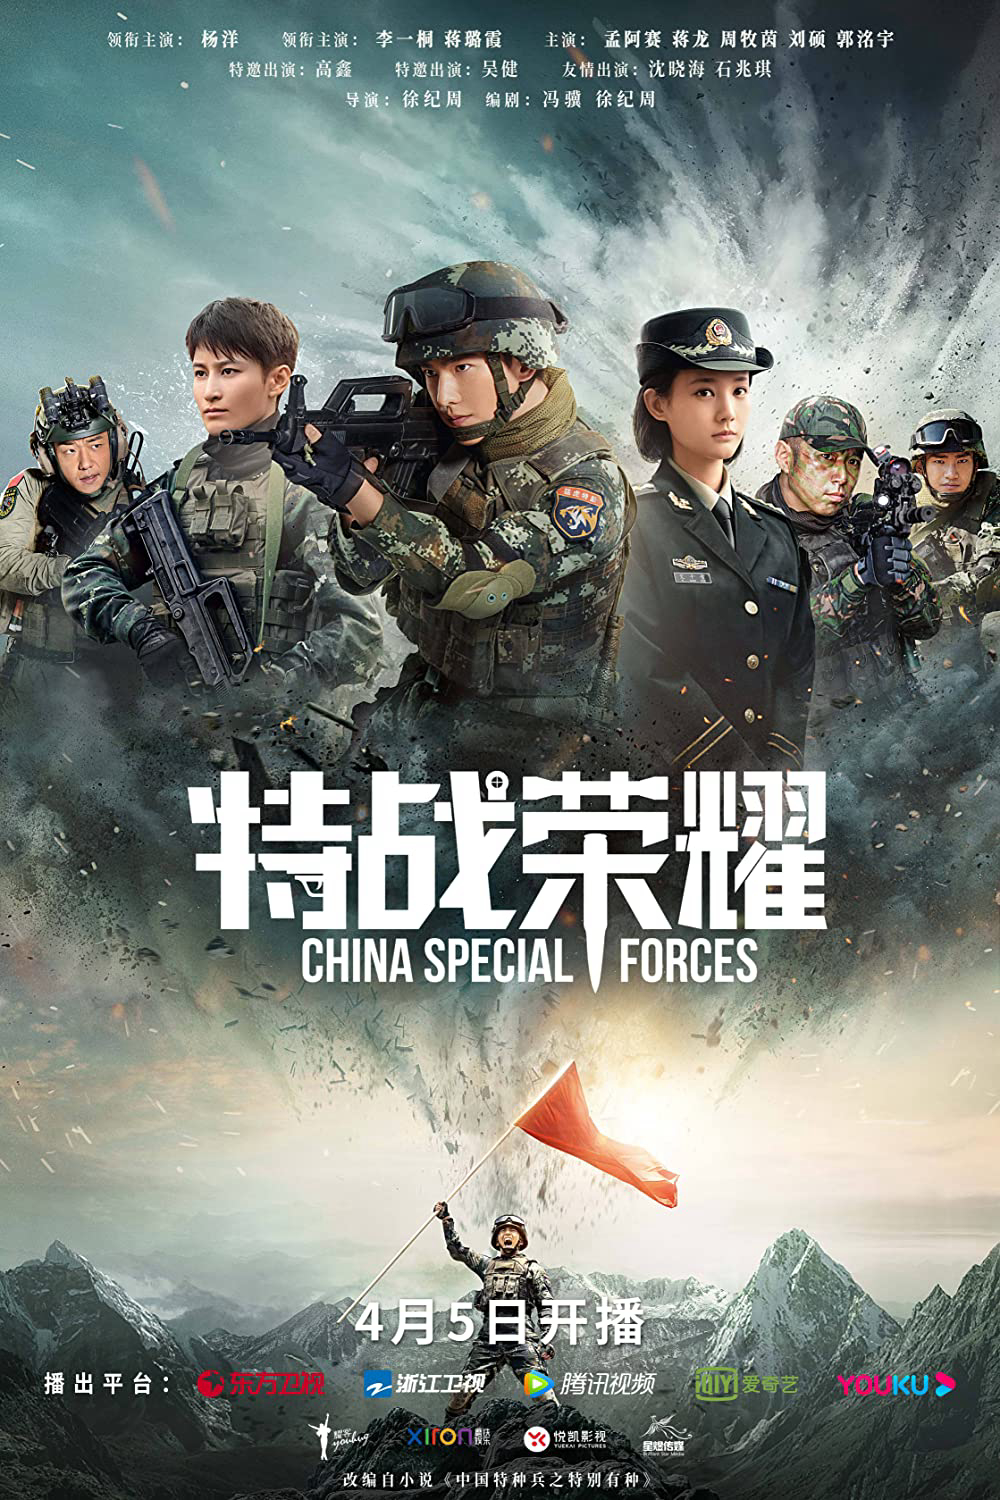 Poster Phim Đặc Chiến Vinh Diệu (Glory of Special Forces)